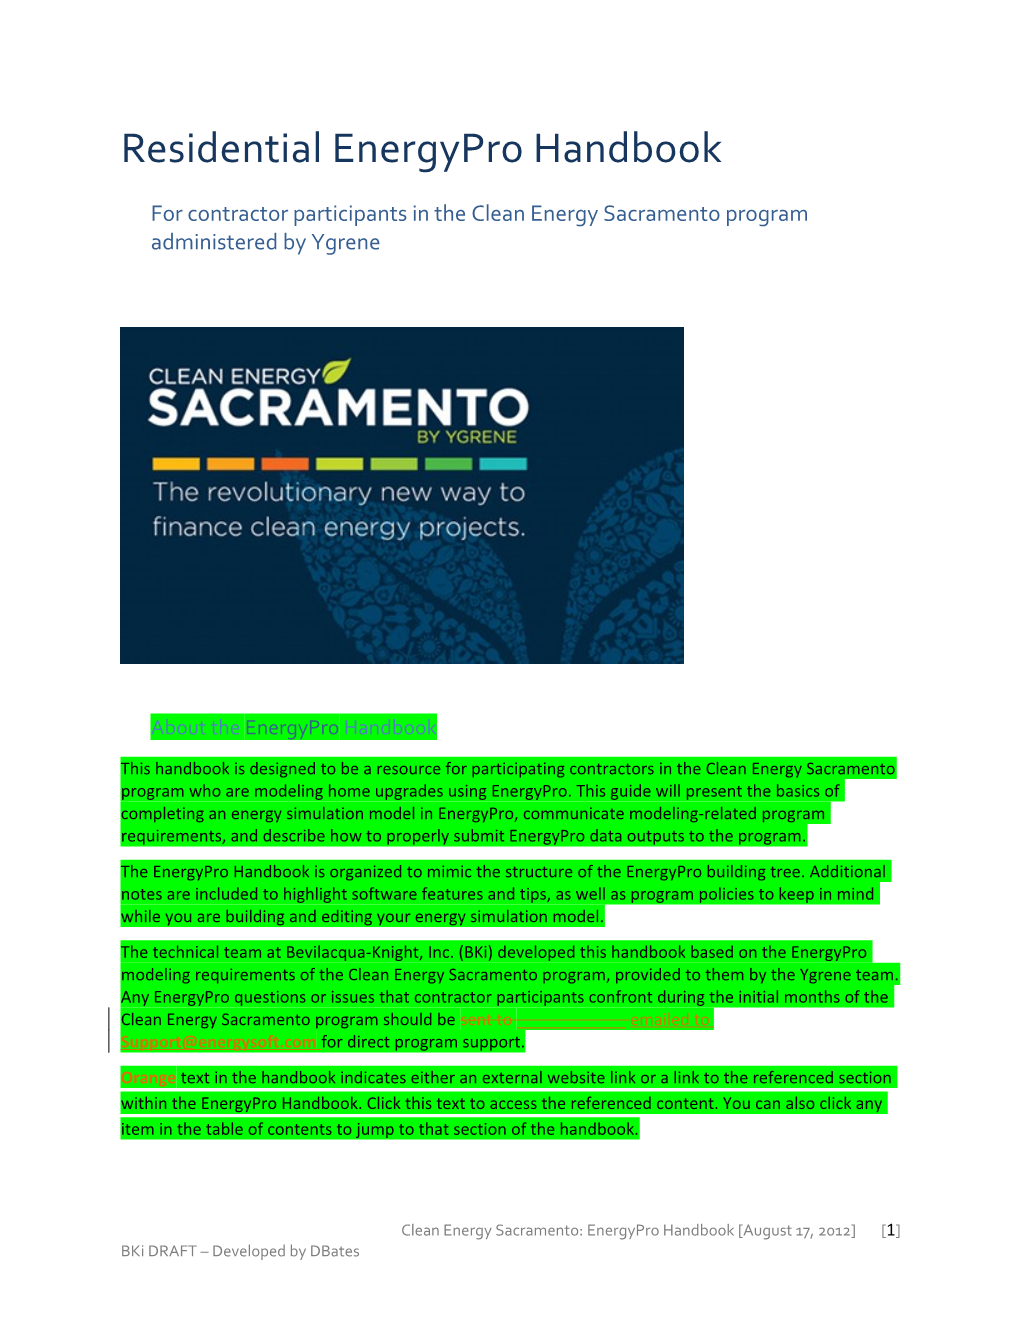 For Contractor Participants in the Clean Energy Sacramento Program Administered by Ygrene